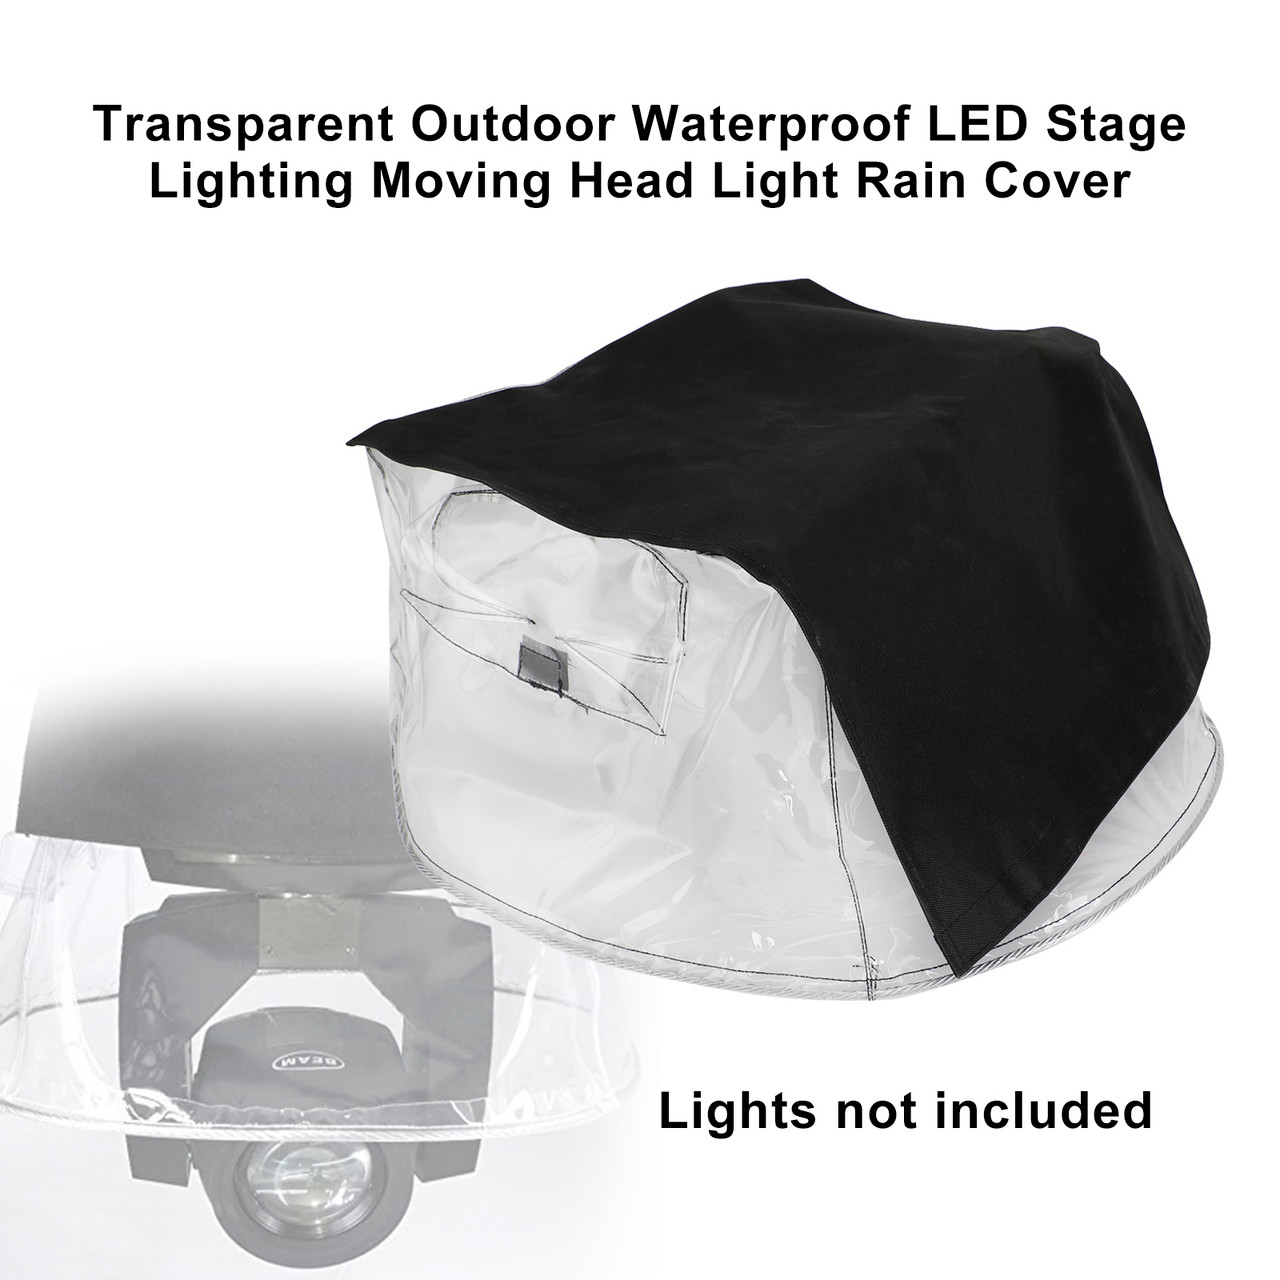 Transparent Outdoor Waterproof LED Stage Lighting Moving Head Light Rain Cover